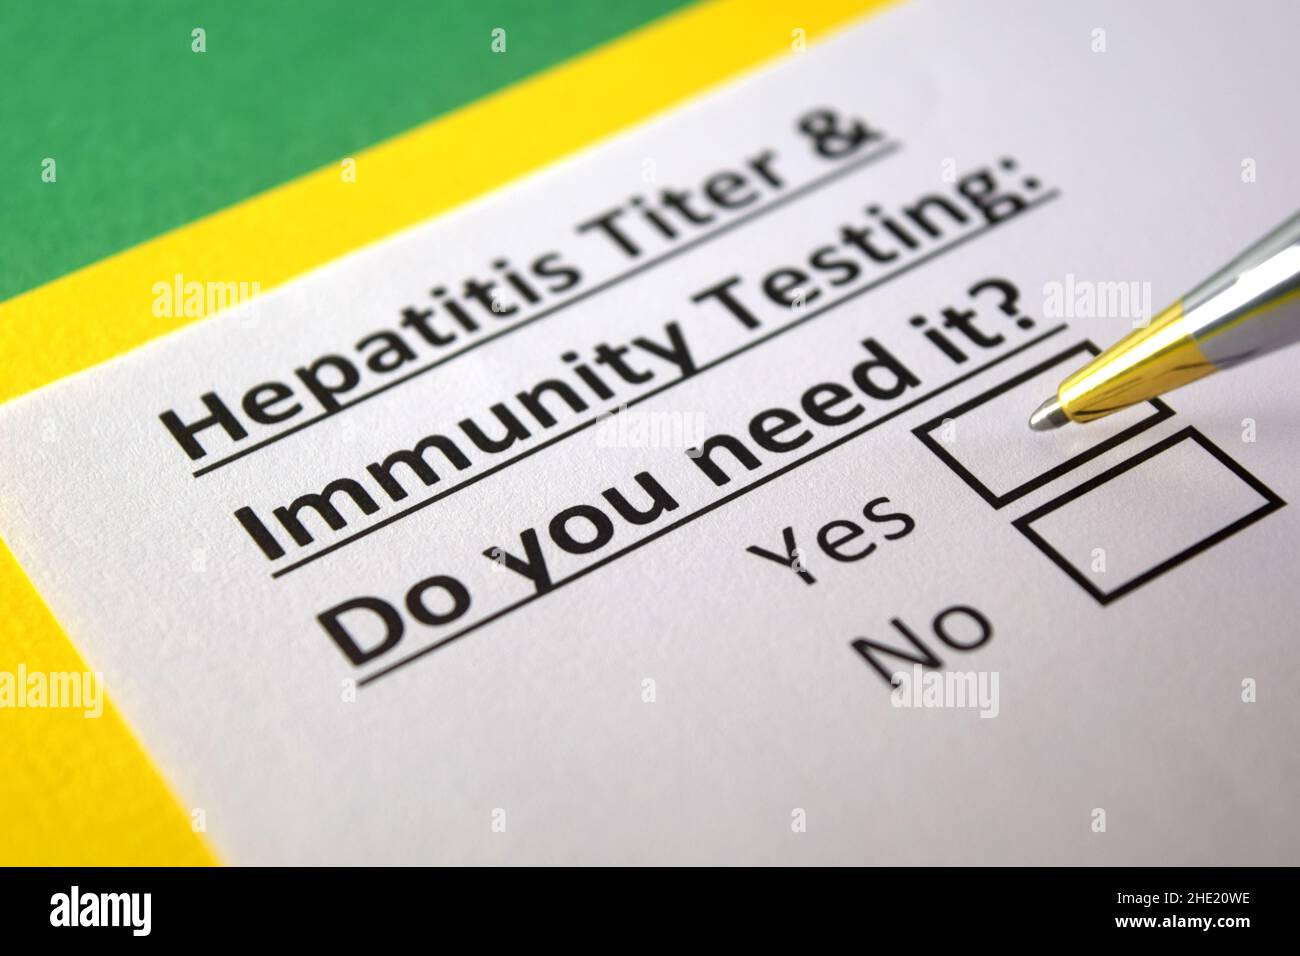 One person is answering question about hepatitis titer and immunity testing. Stock Photo